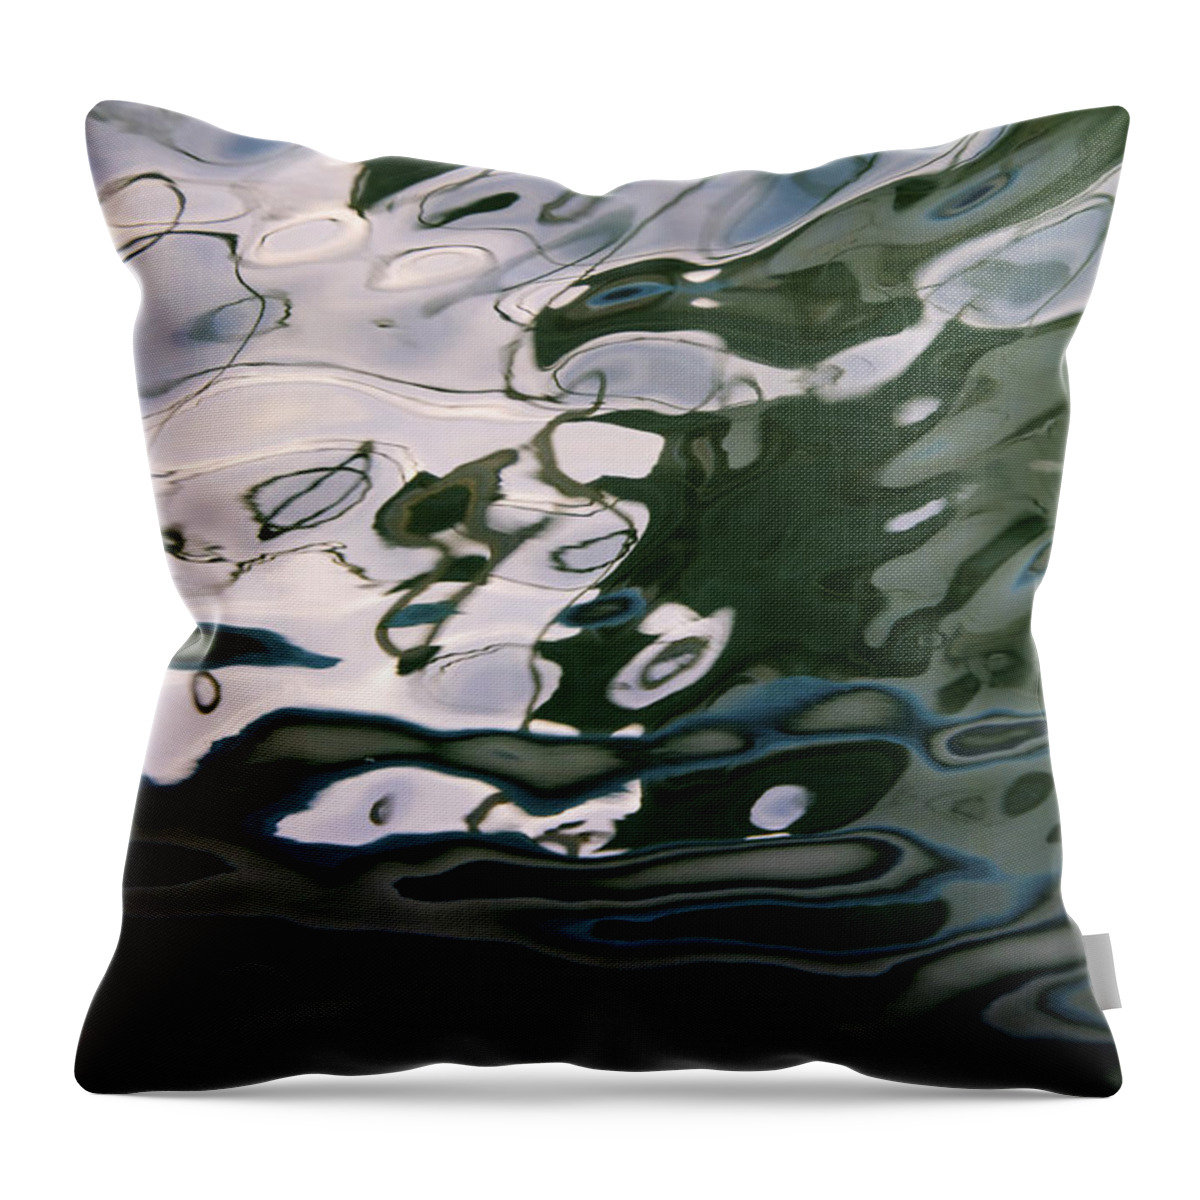 Bank Throw Pillow featuring the photograph Boat Reflections At Sea by Stelios Kleanthous